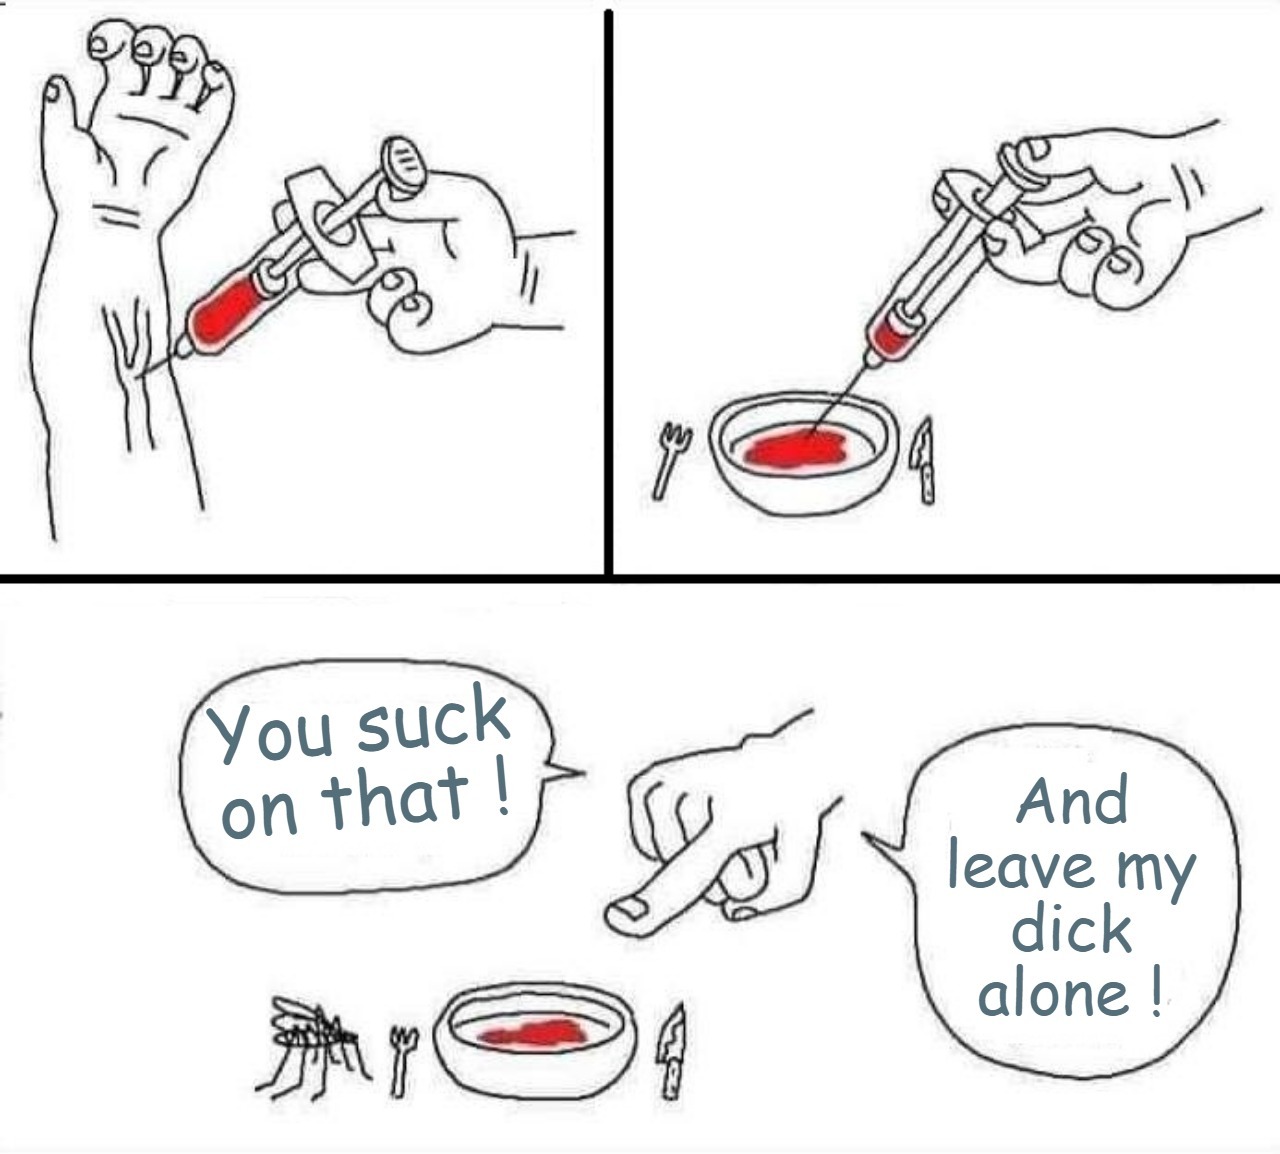 Why are you gay, Mr. Mosquito ? - meme